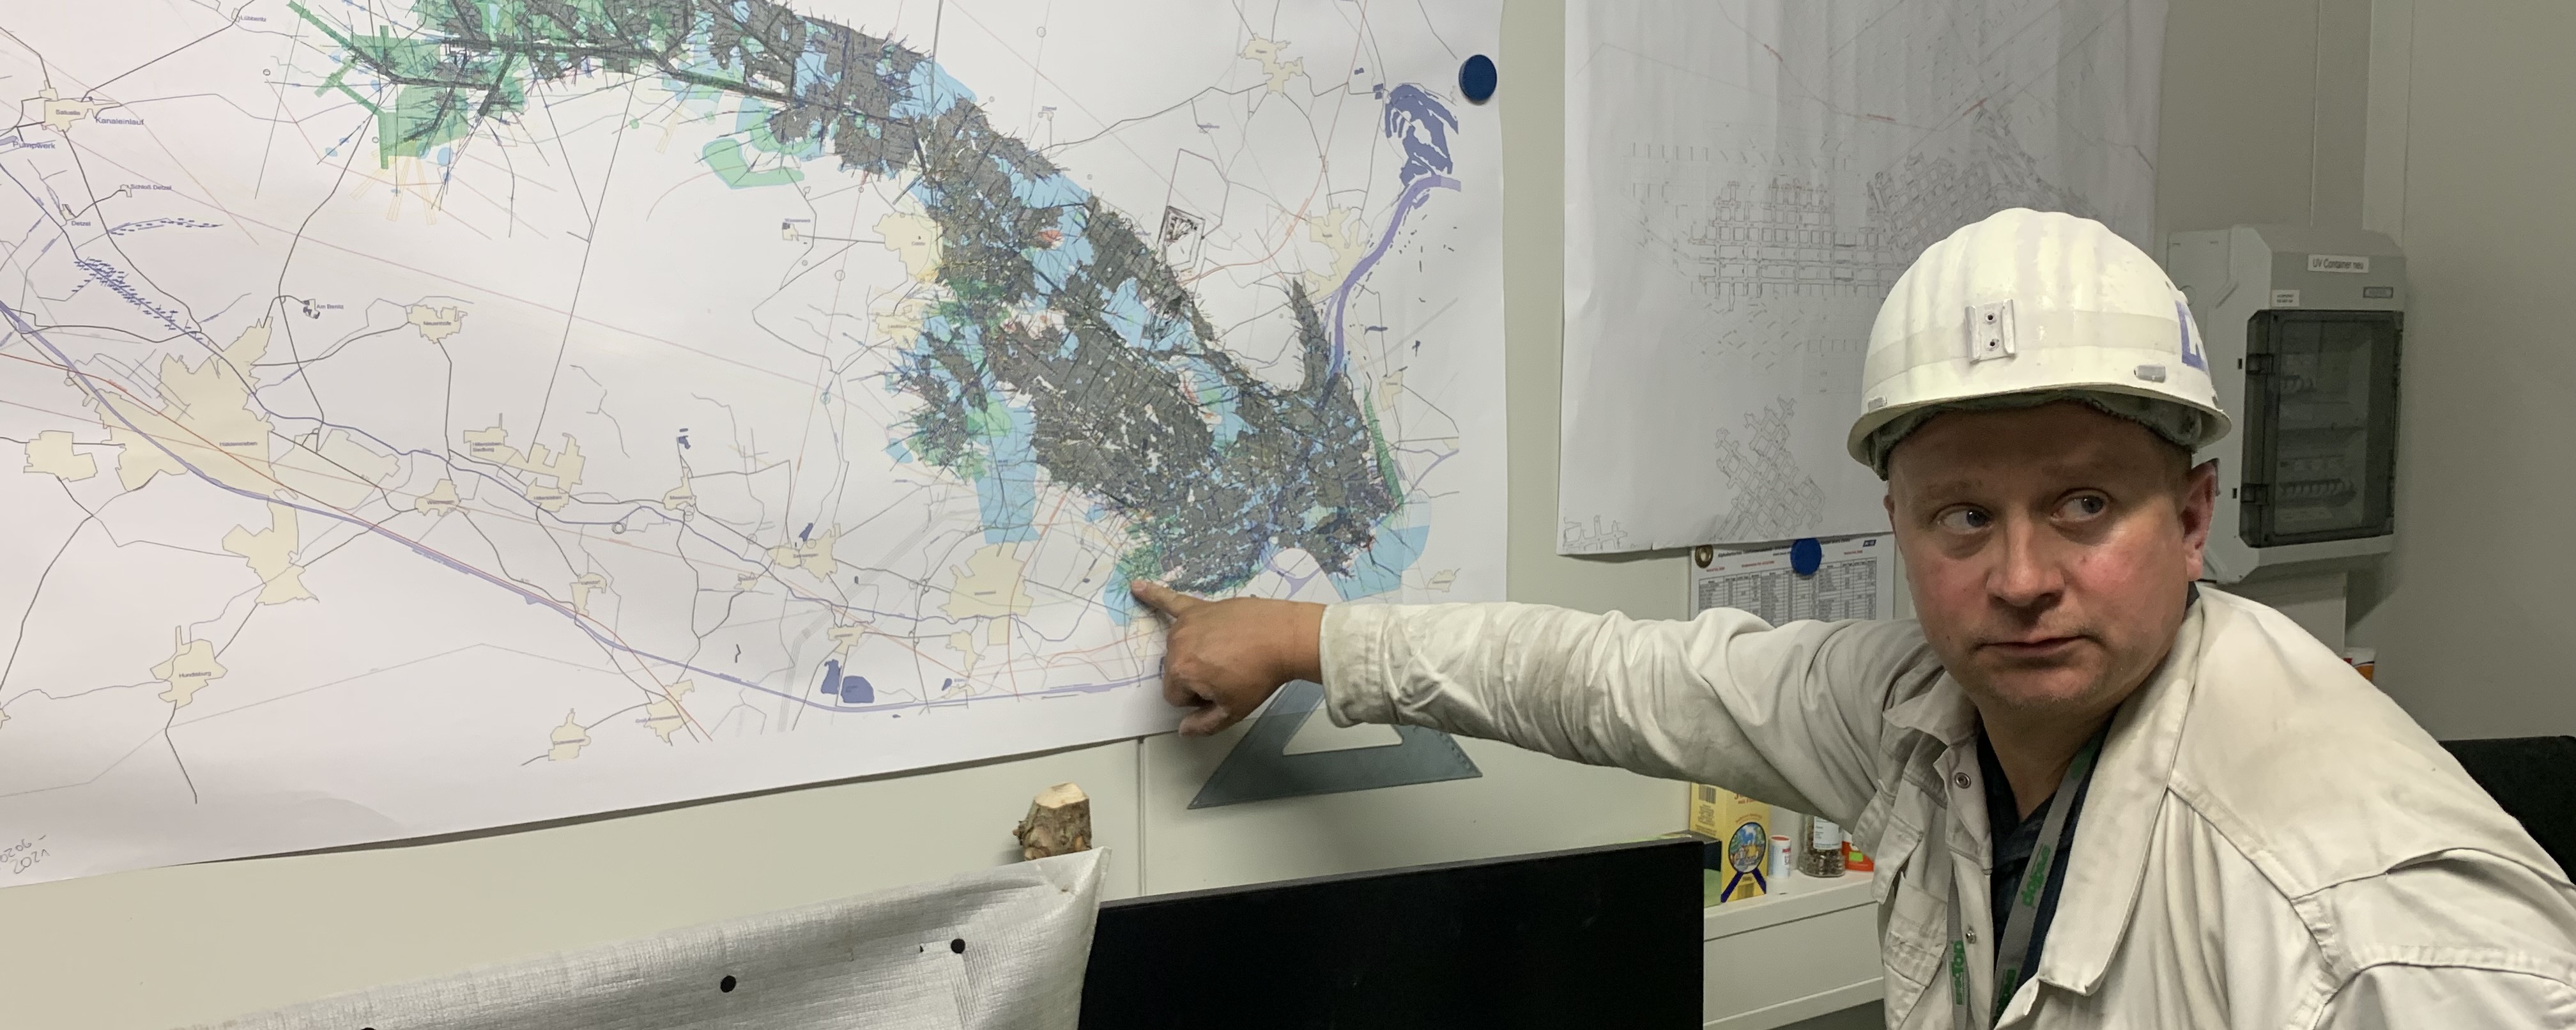 District manager Patrick Schäfer shows the so-called pit plan of the Zielitz mine, on which all underground mining districts are precisely marked.